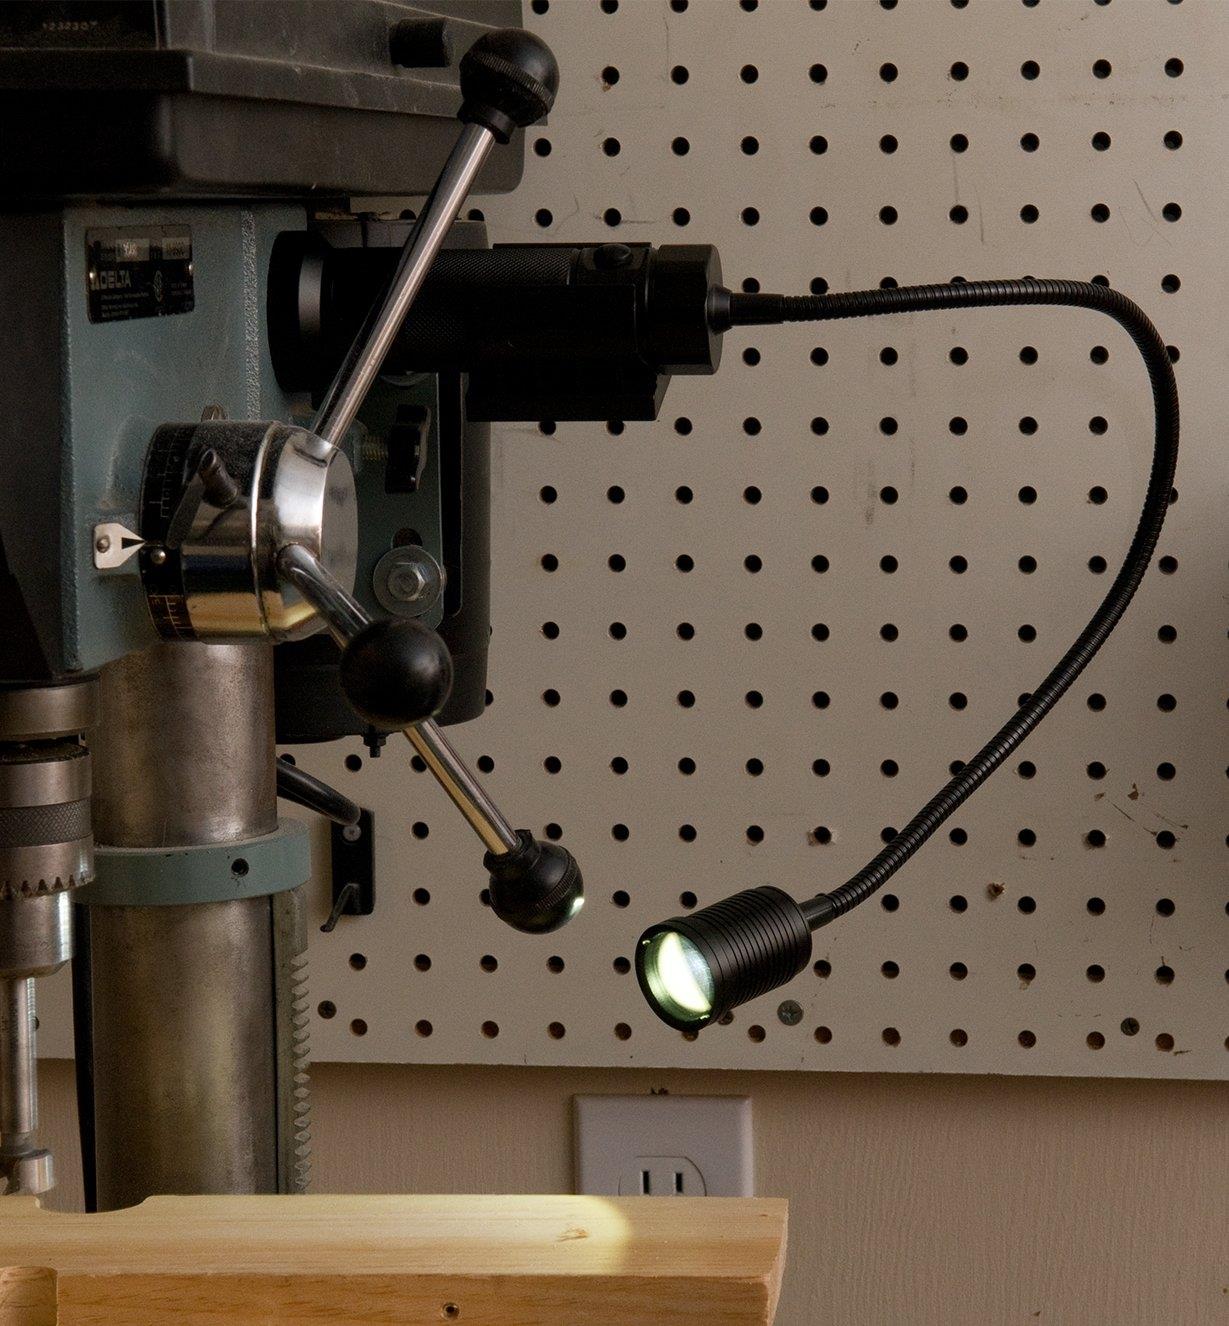 Magnetic-Mount LED Work Light mounted to a drill press